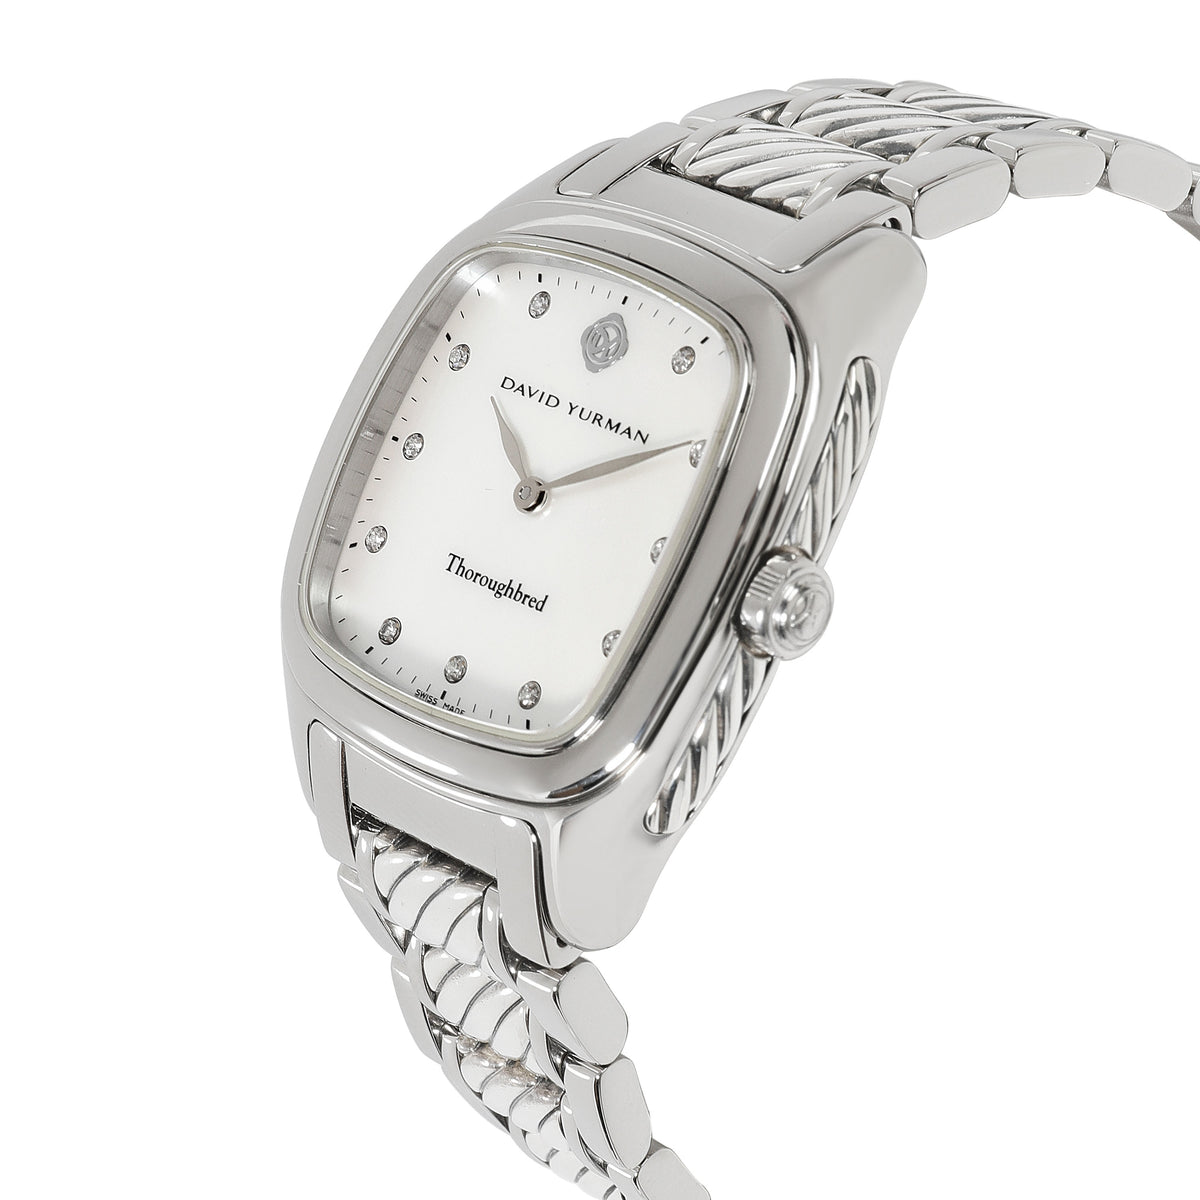 David Yurman Thoroughbred T303-SST Unisex Watch in  Sterling Silver/Stainless St